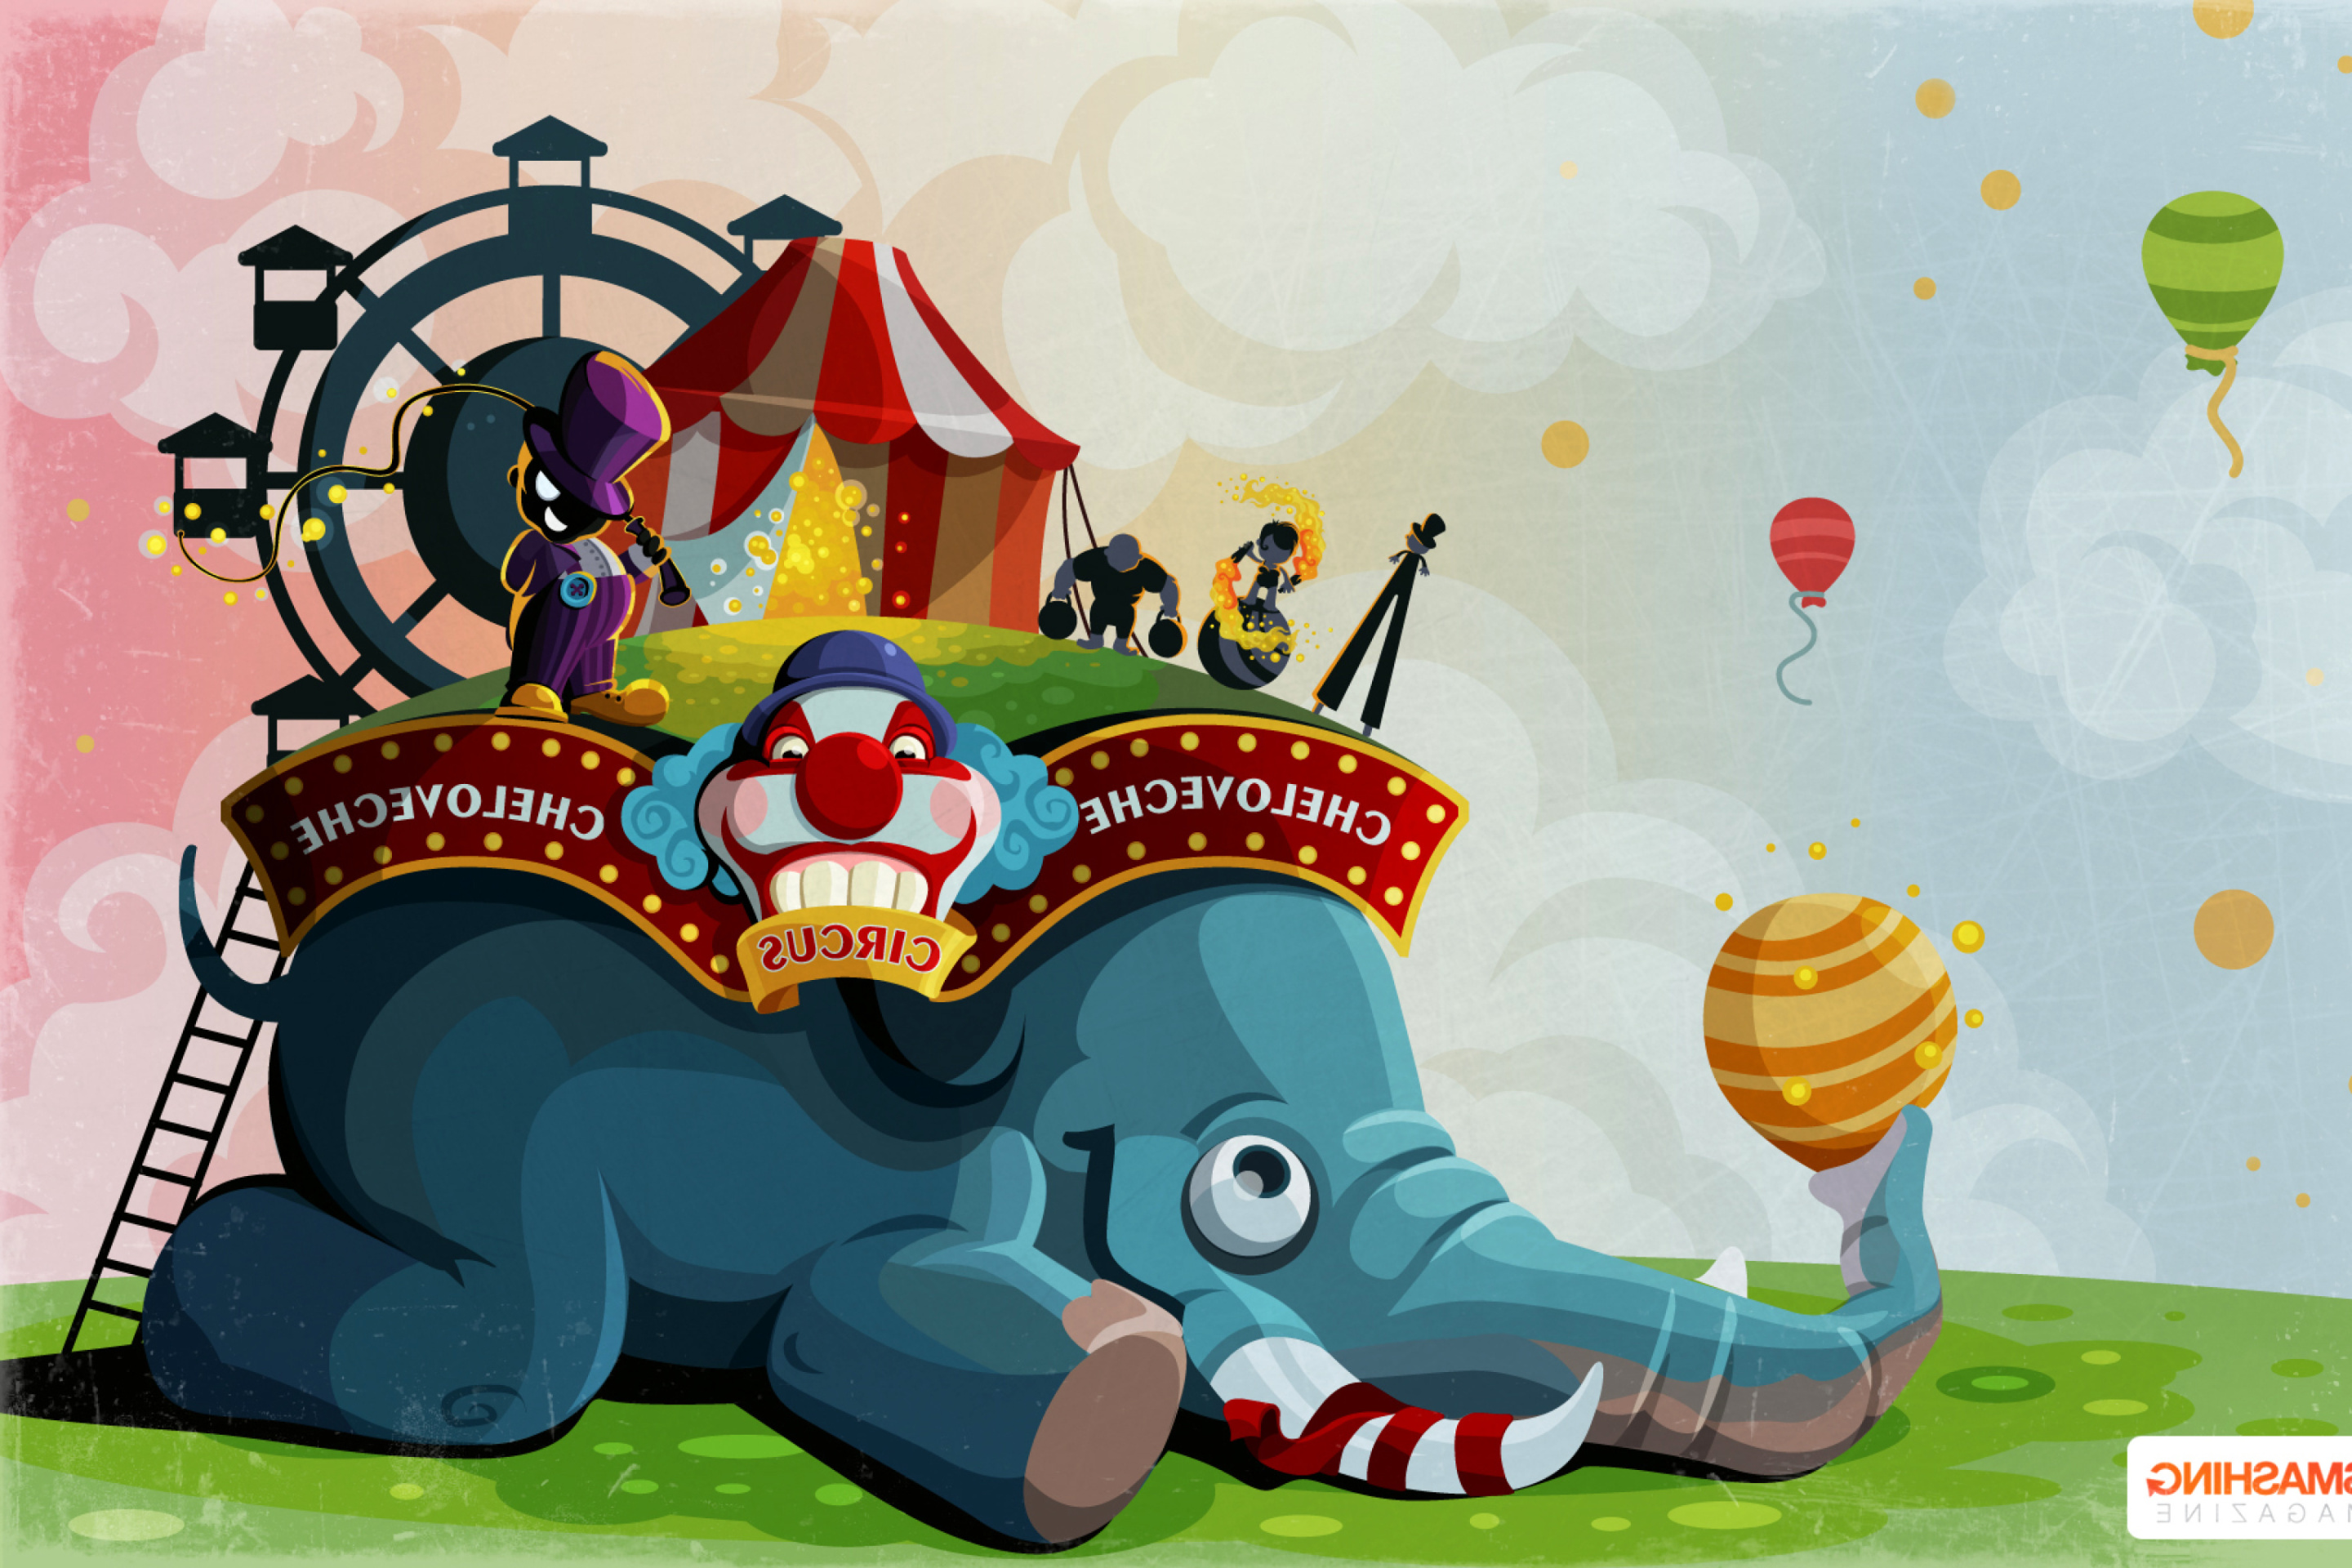 Circus with Elephant wallpaper 2880x1920